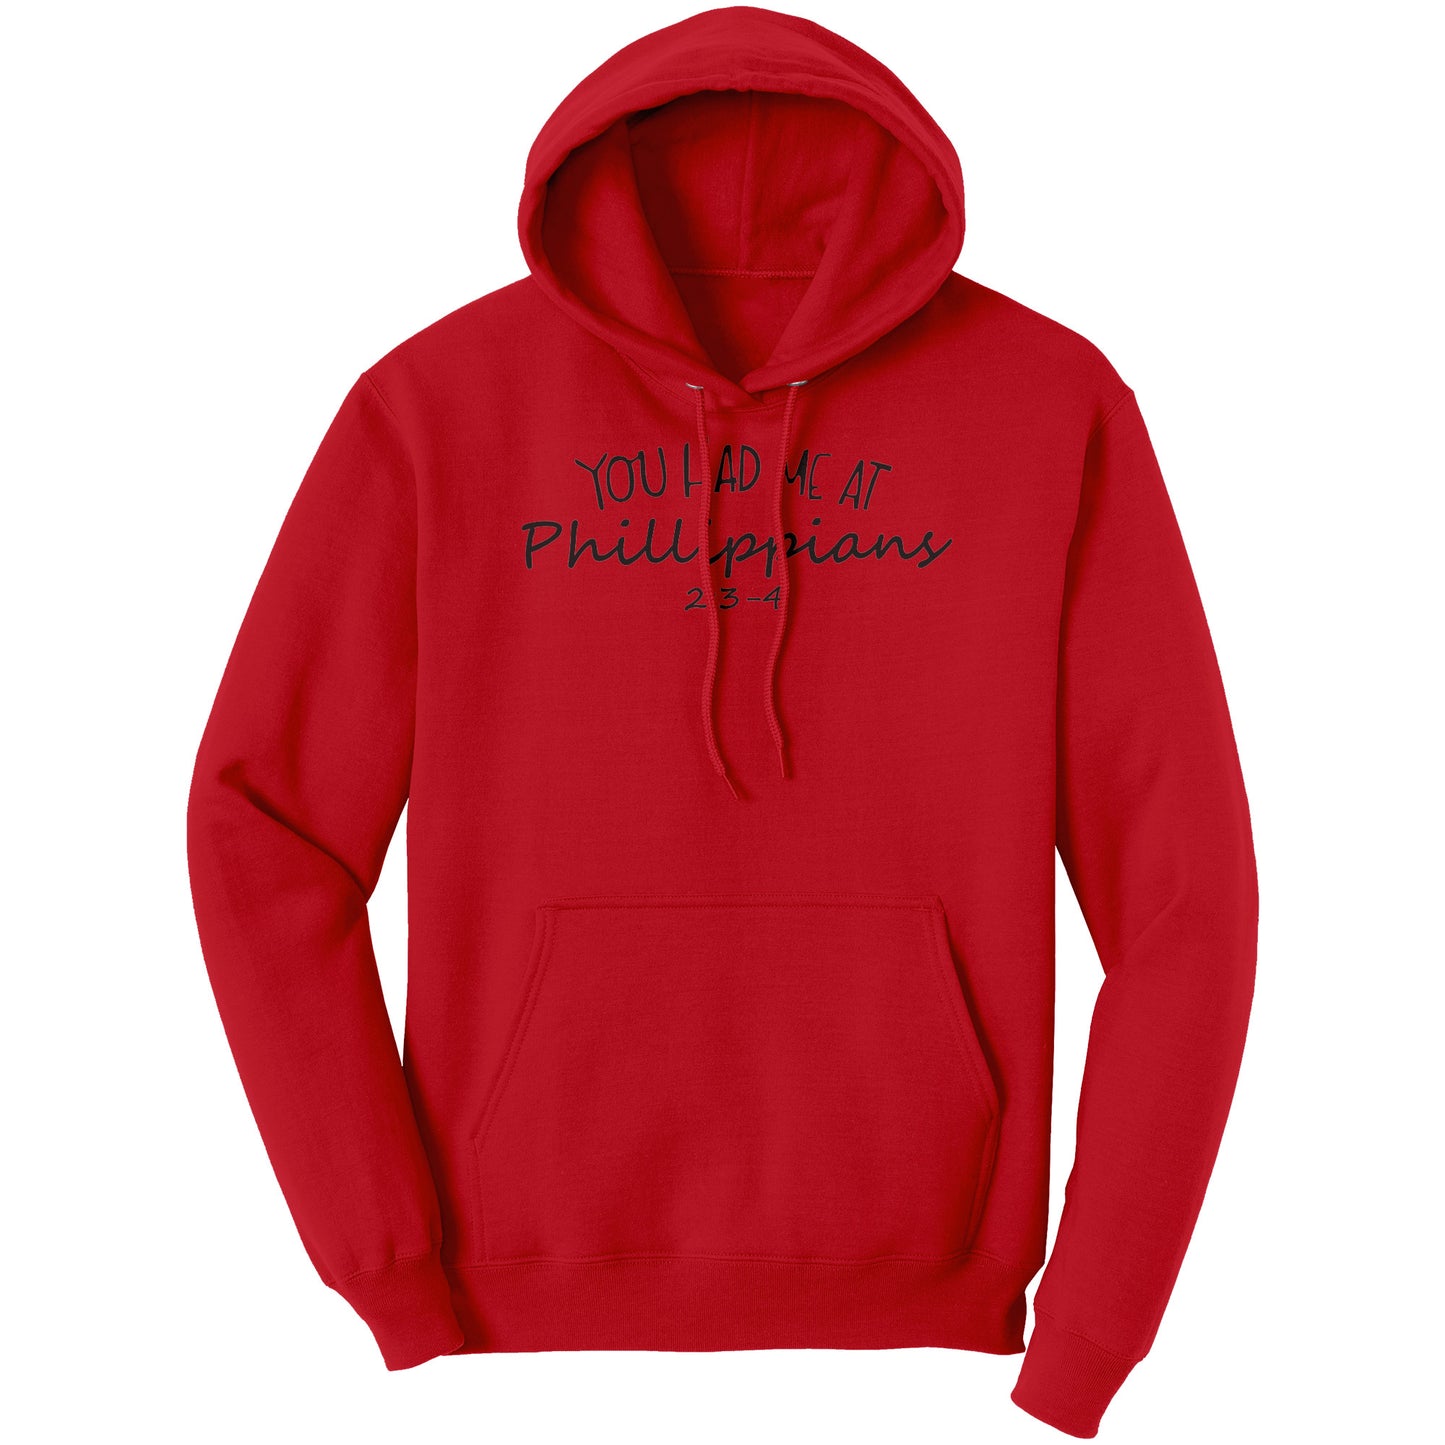 You Had Me At Philippians 2:3-4 Hoodie Part 1